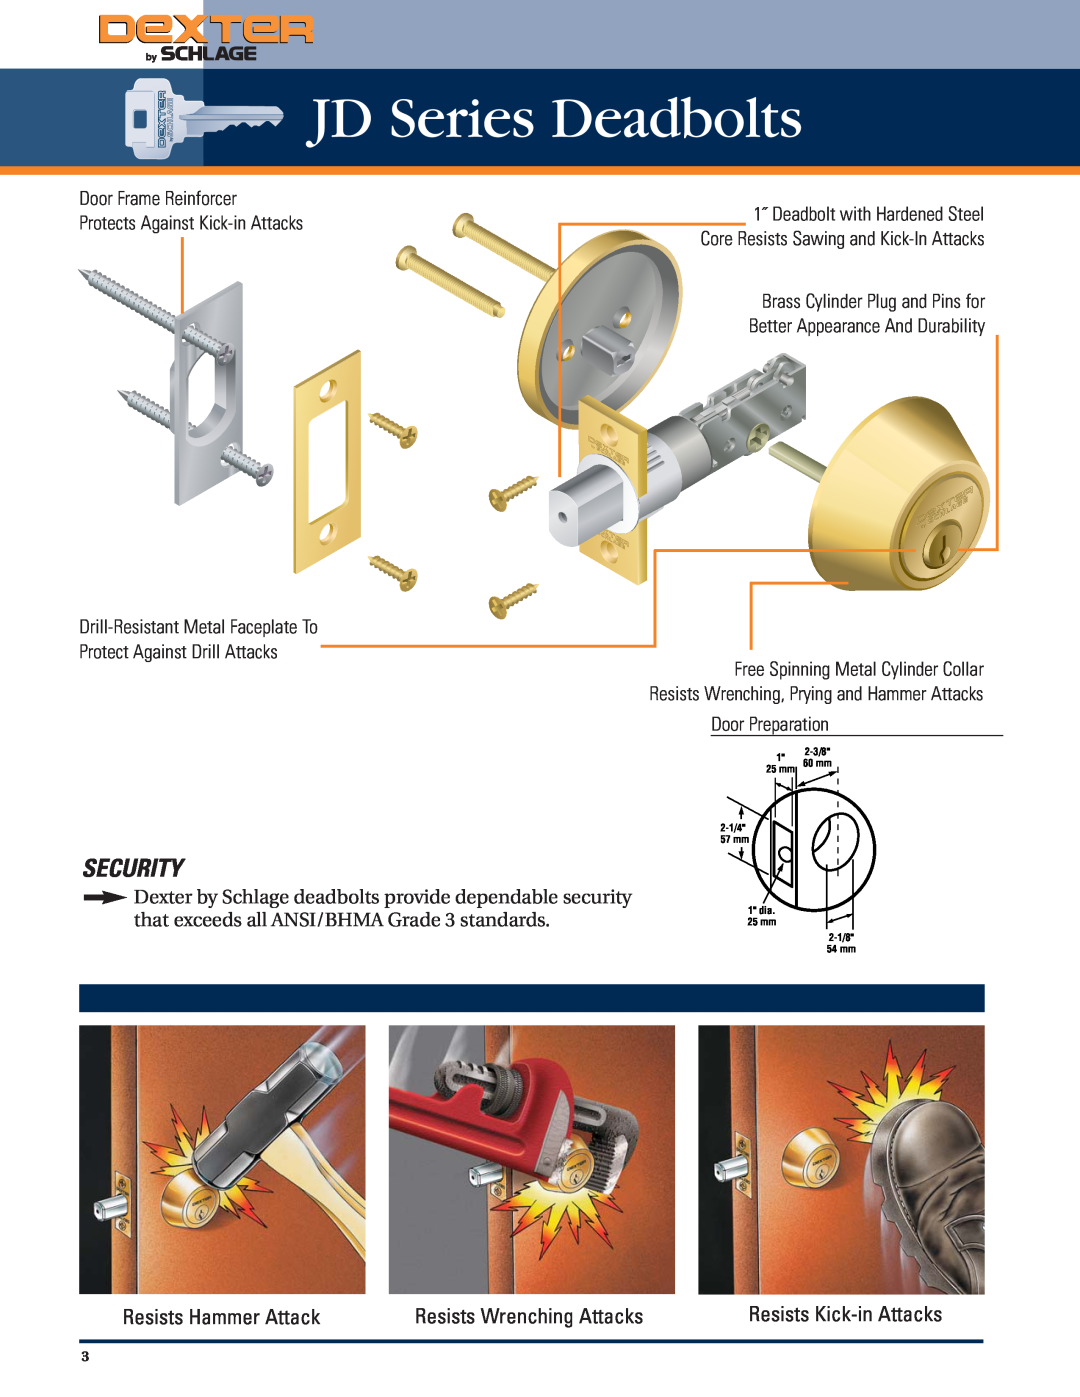 Schlage Residential Lock JD Series Deadbolts, Security, Resists Hammer Attack, Resists Wrenching Attacks, Door Preparation 